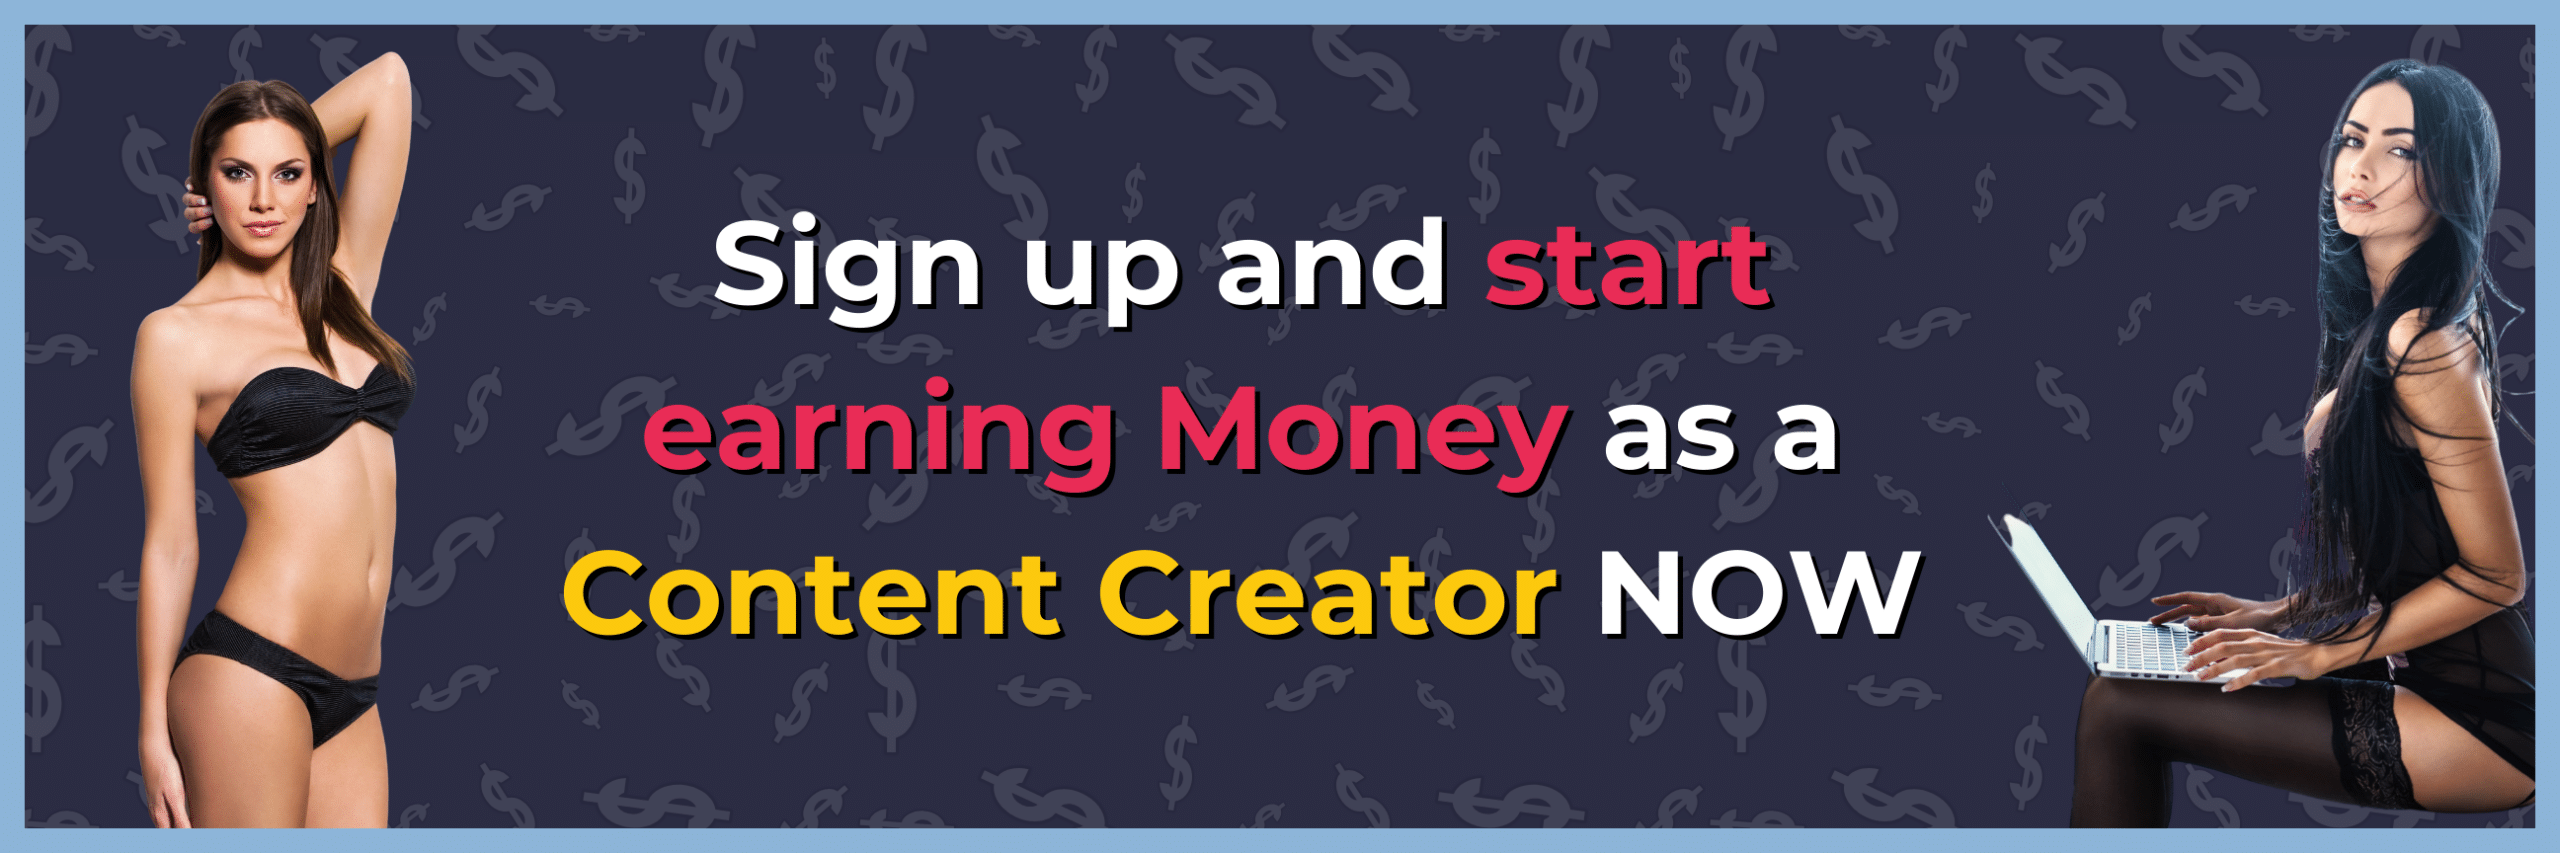 Sign up and start earning